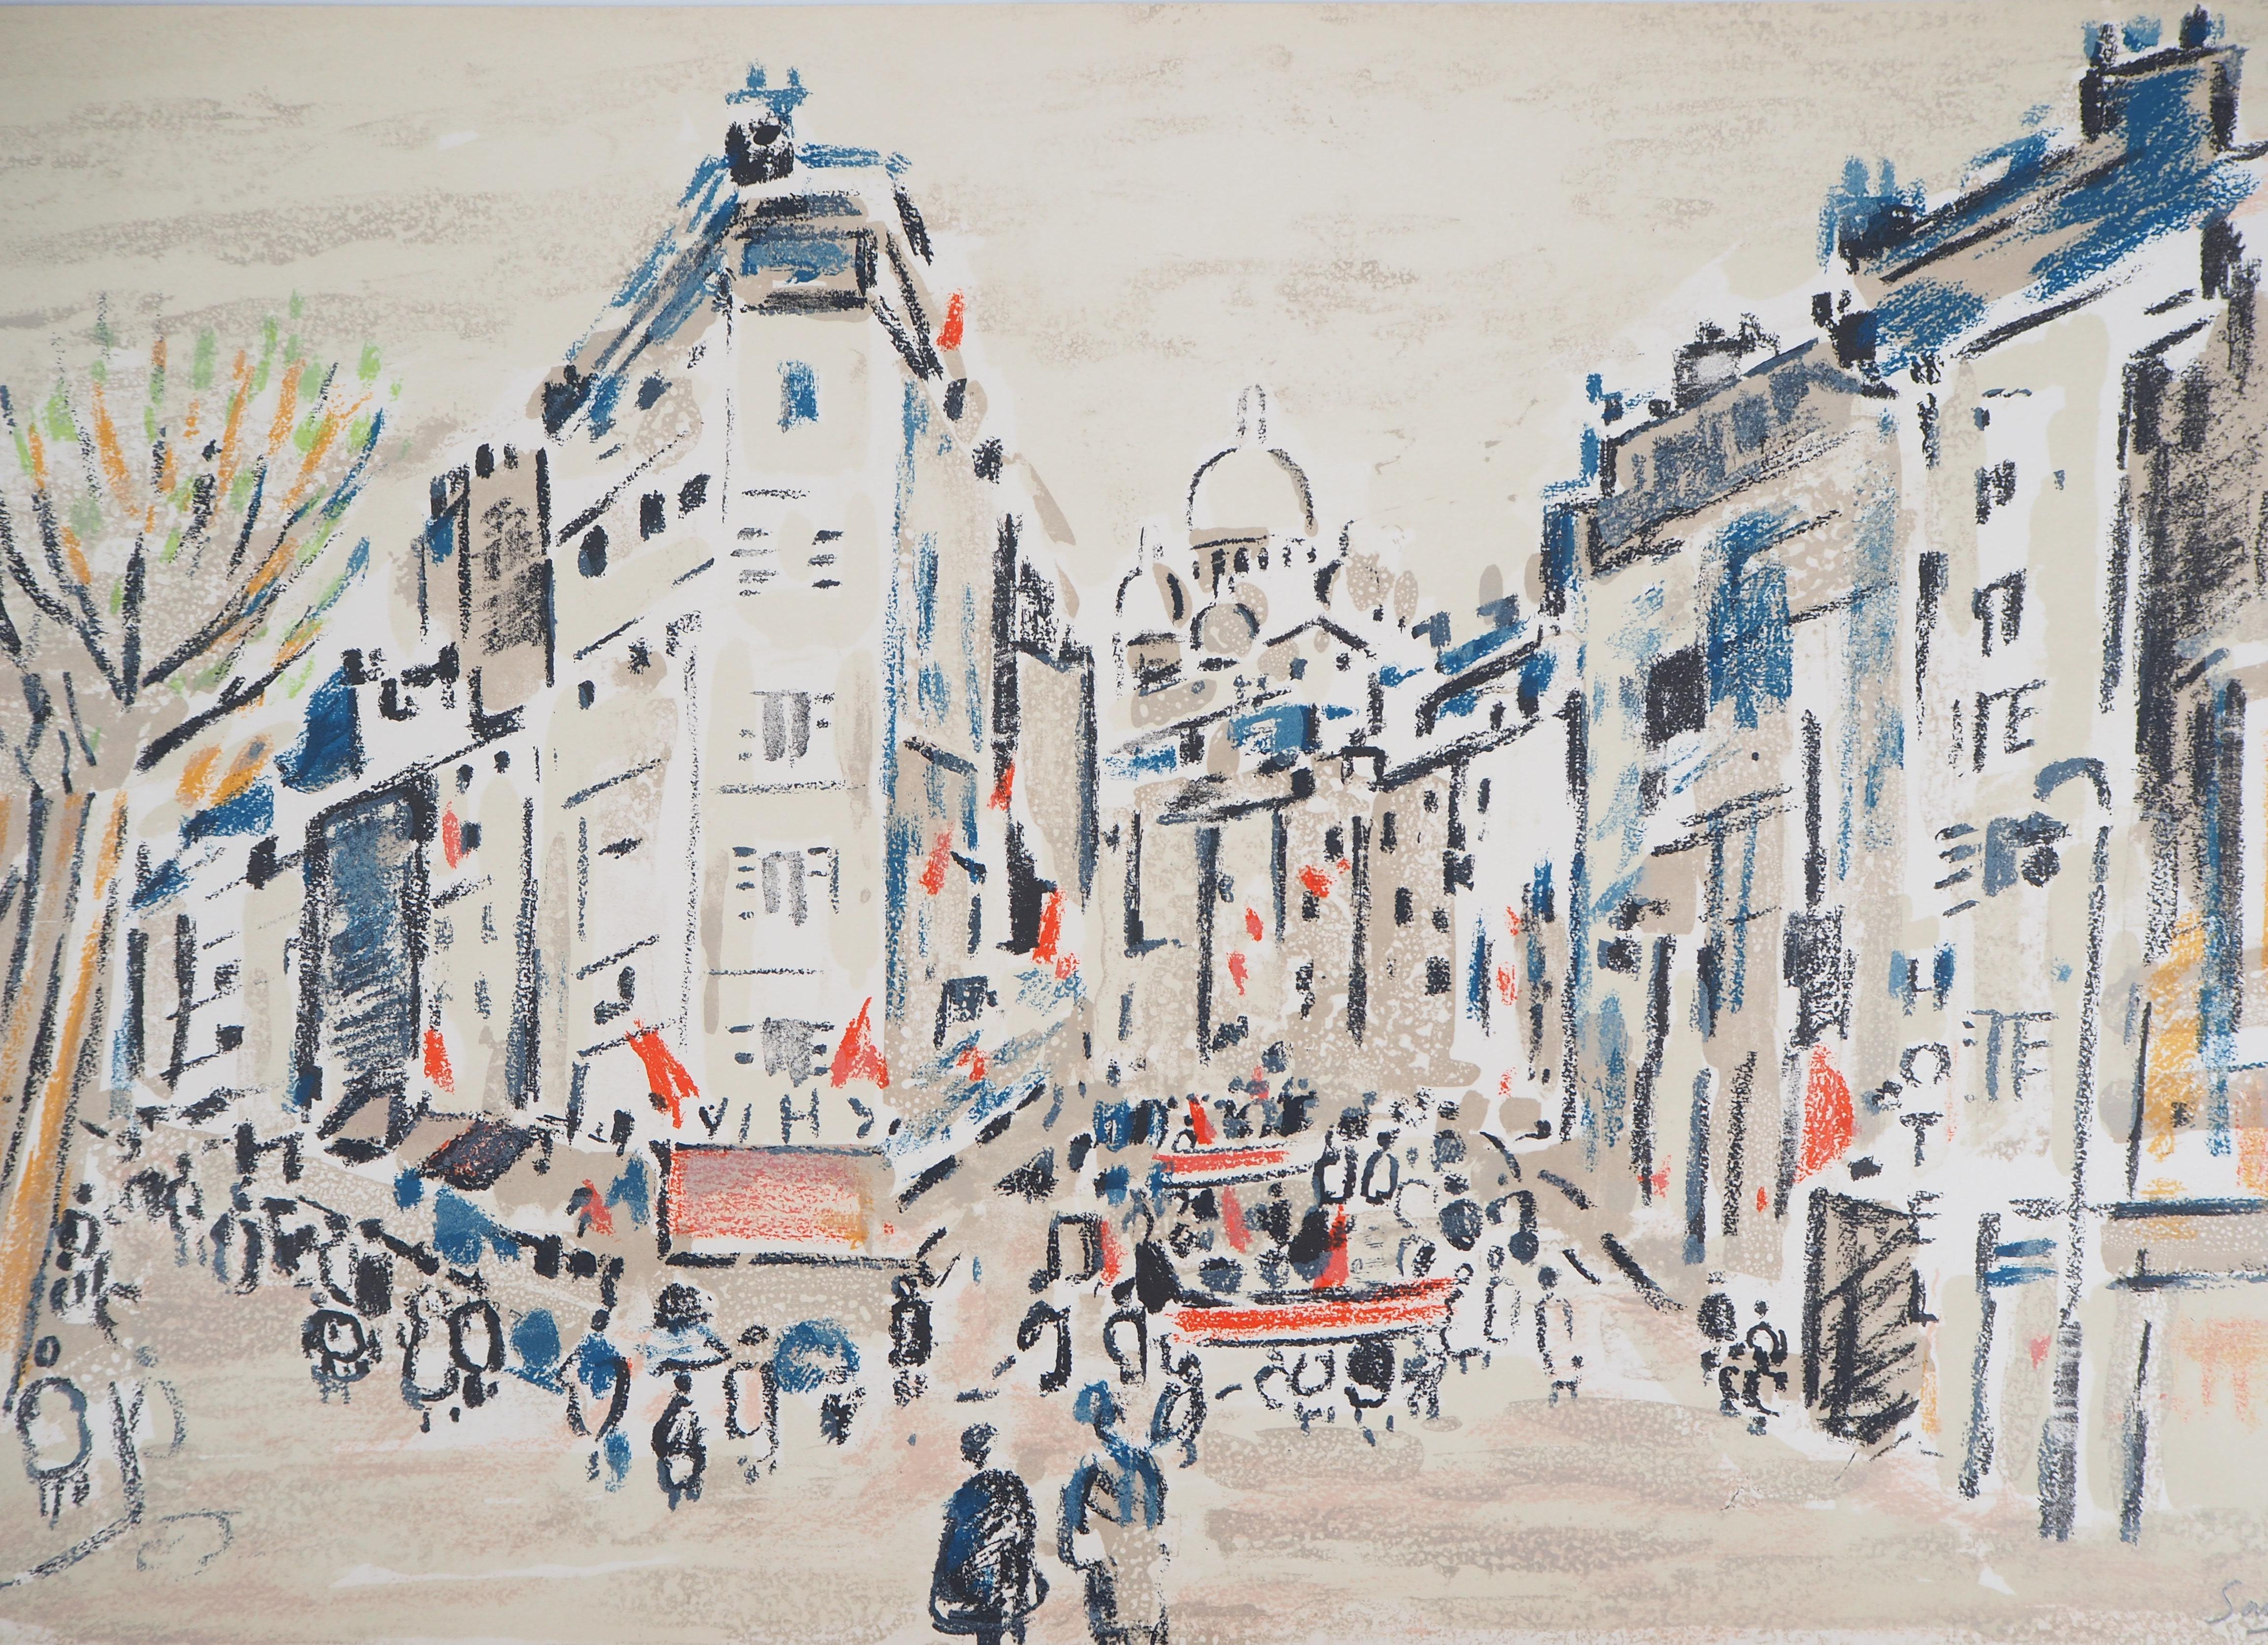 Paris : On the Way to Montmartre - Original Lithograph, Handsigned 1